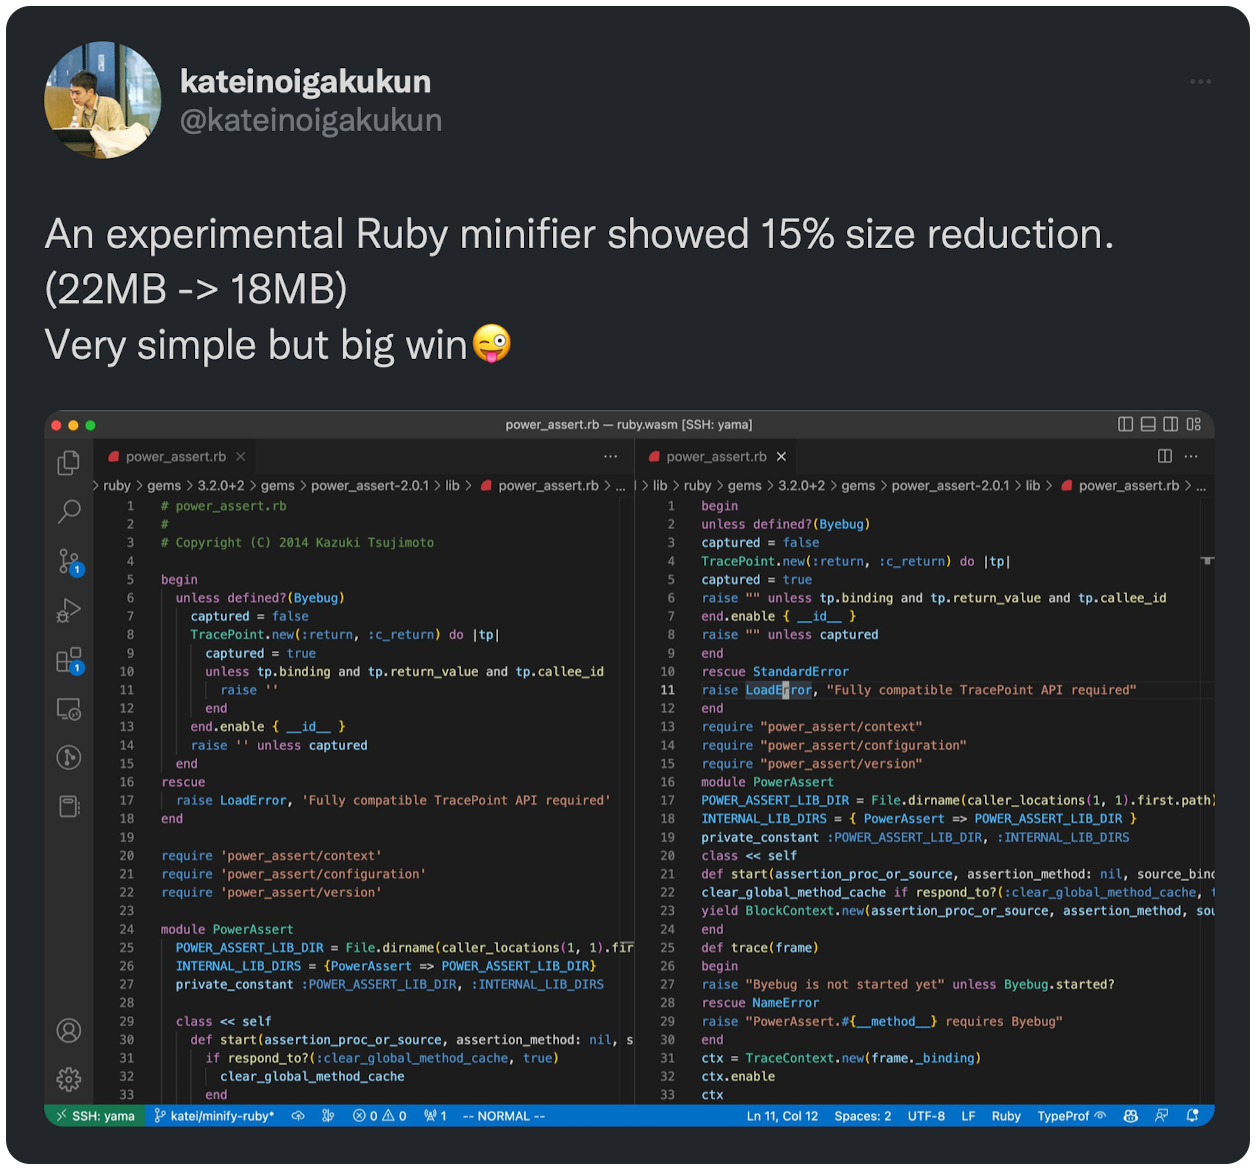 An experimental Ruby minifier showed 15% size reduction. (22MB -&gt; 18MB) Very simple but big win😜 